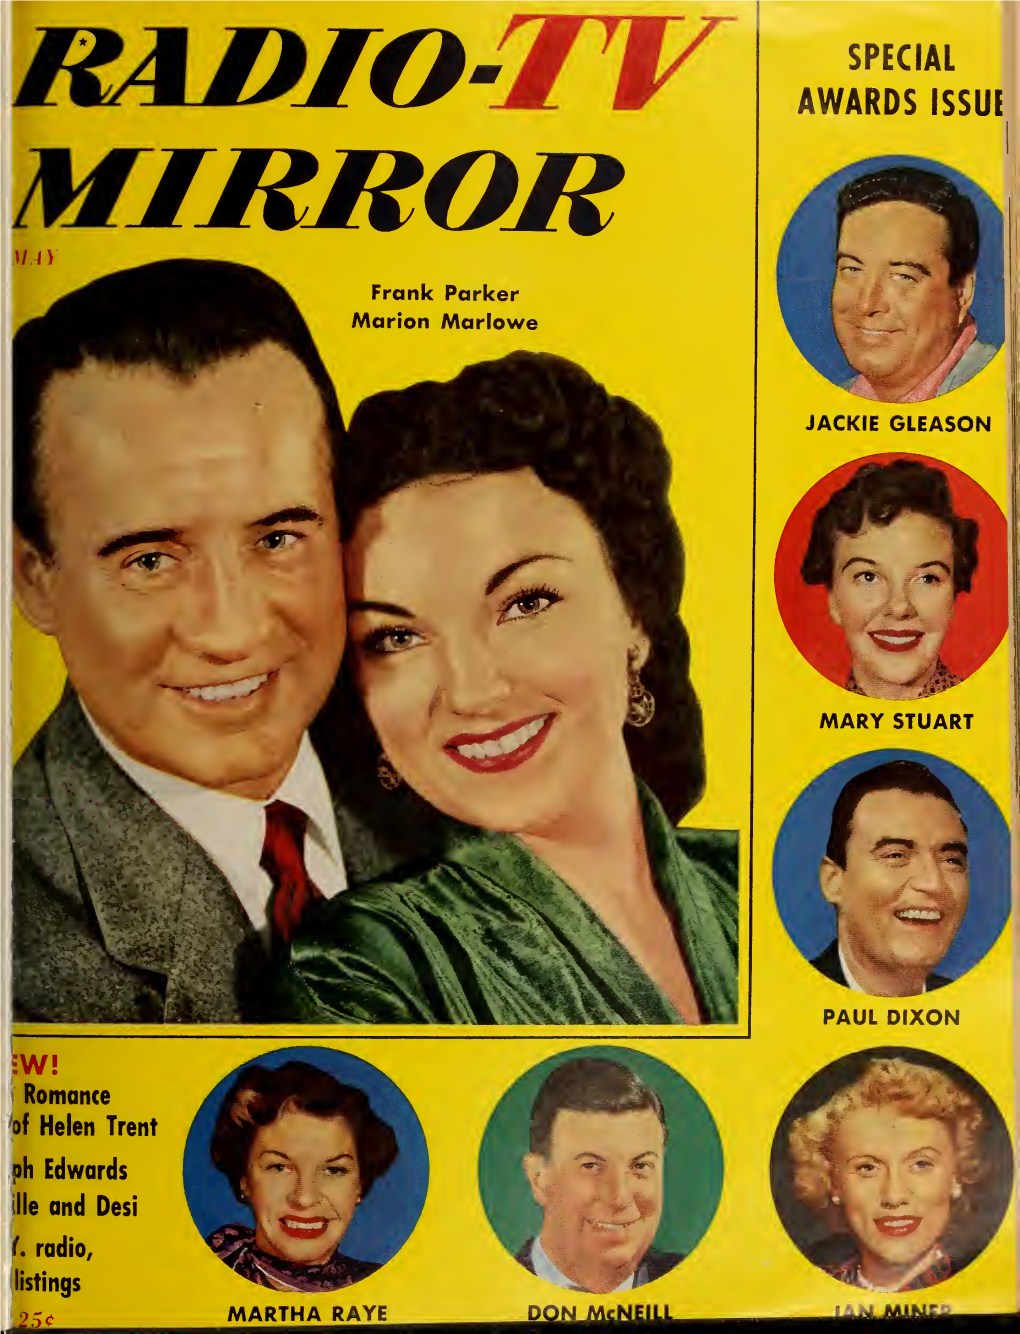 Radio TV Mirror Awards for 1953-54 29 Tor's Discovery, Now Contains Long-Lasting M-3